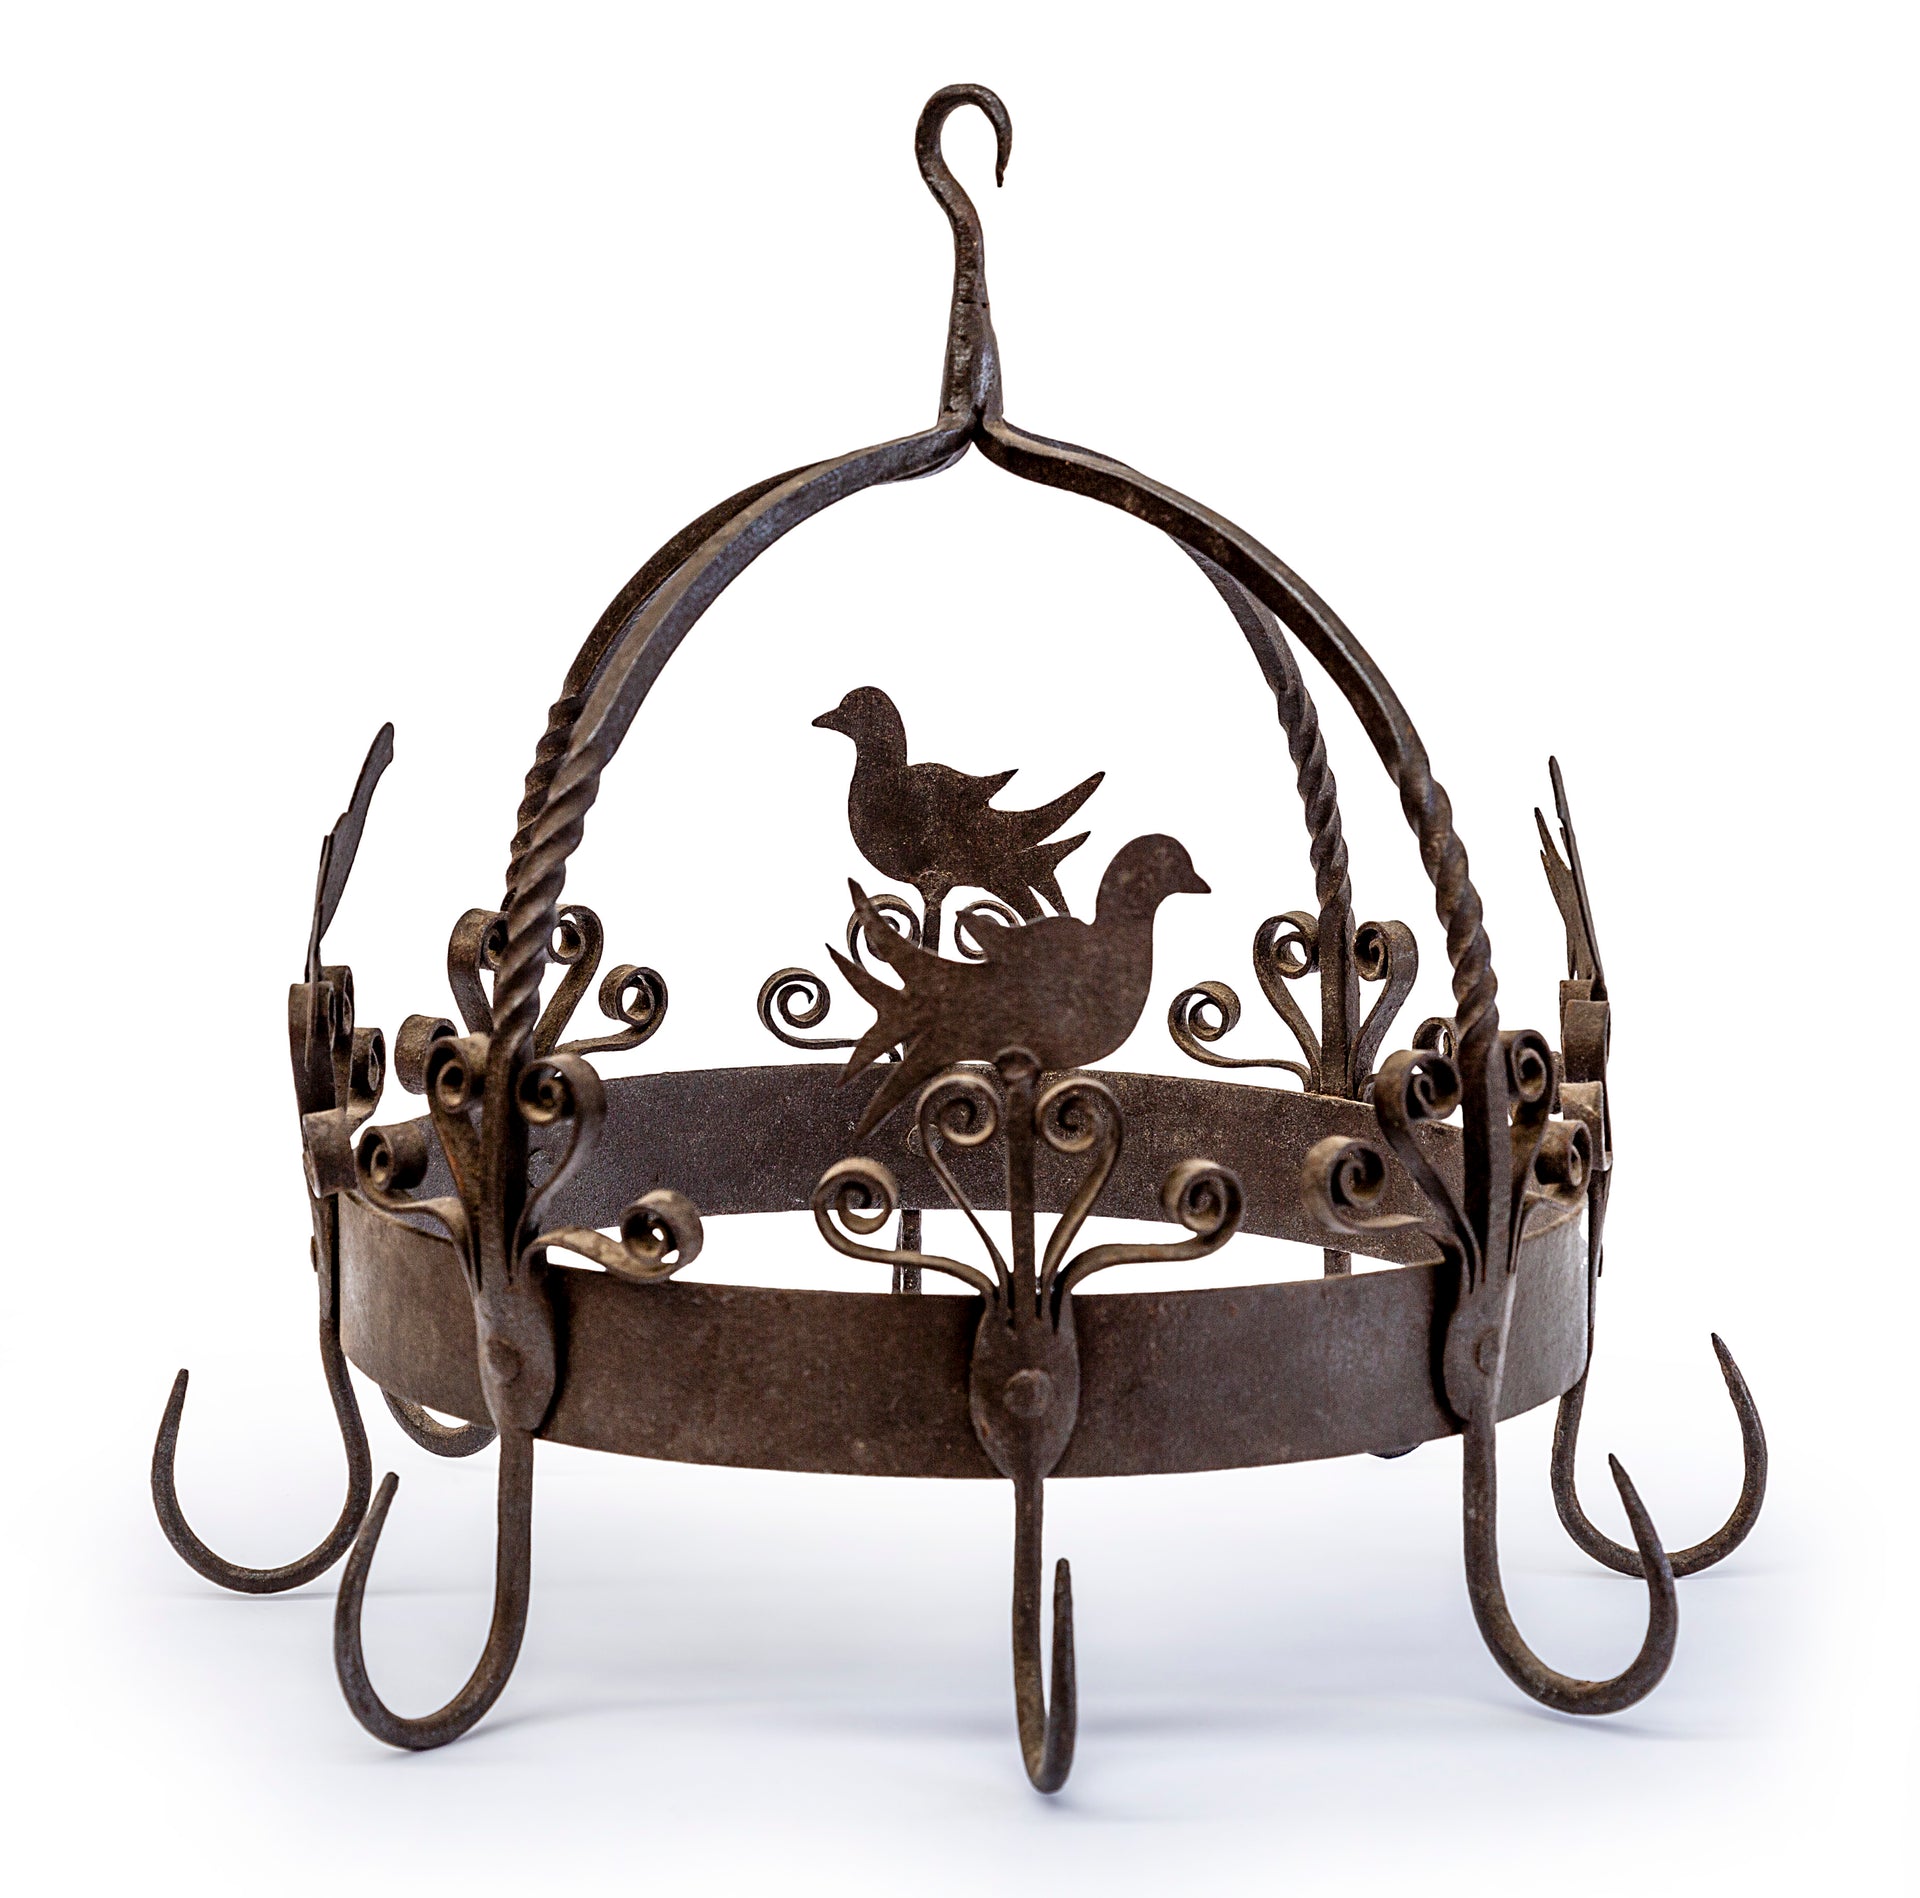 SOLD A whimsical wrought iron hanging pot hook holder, French 19th Century